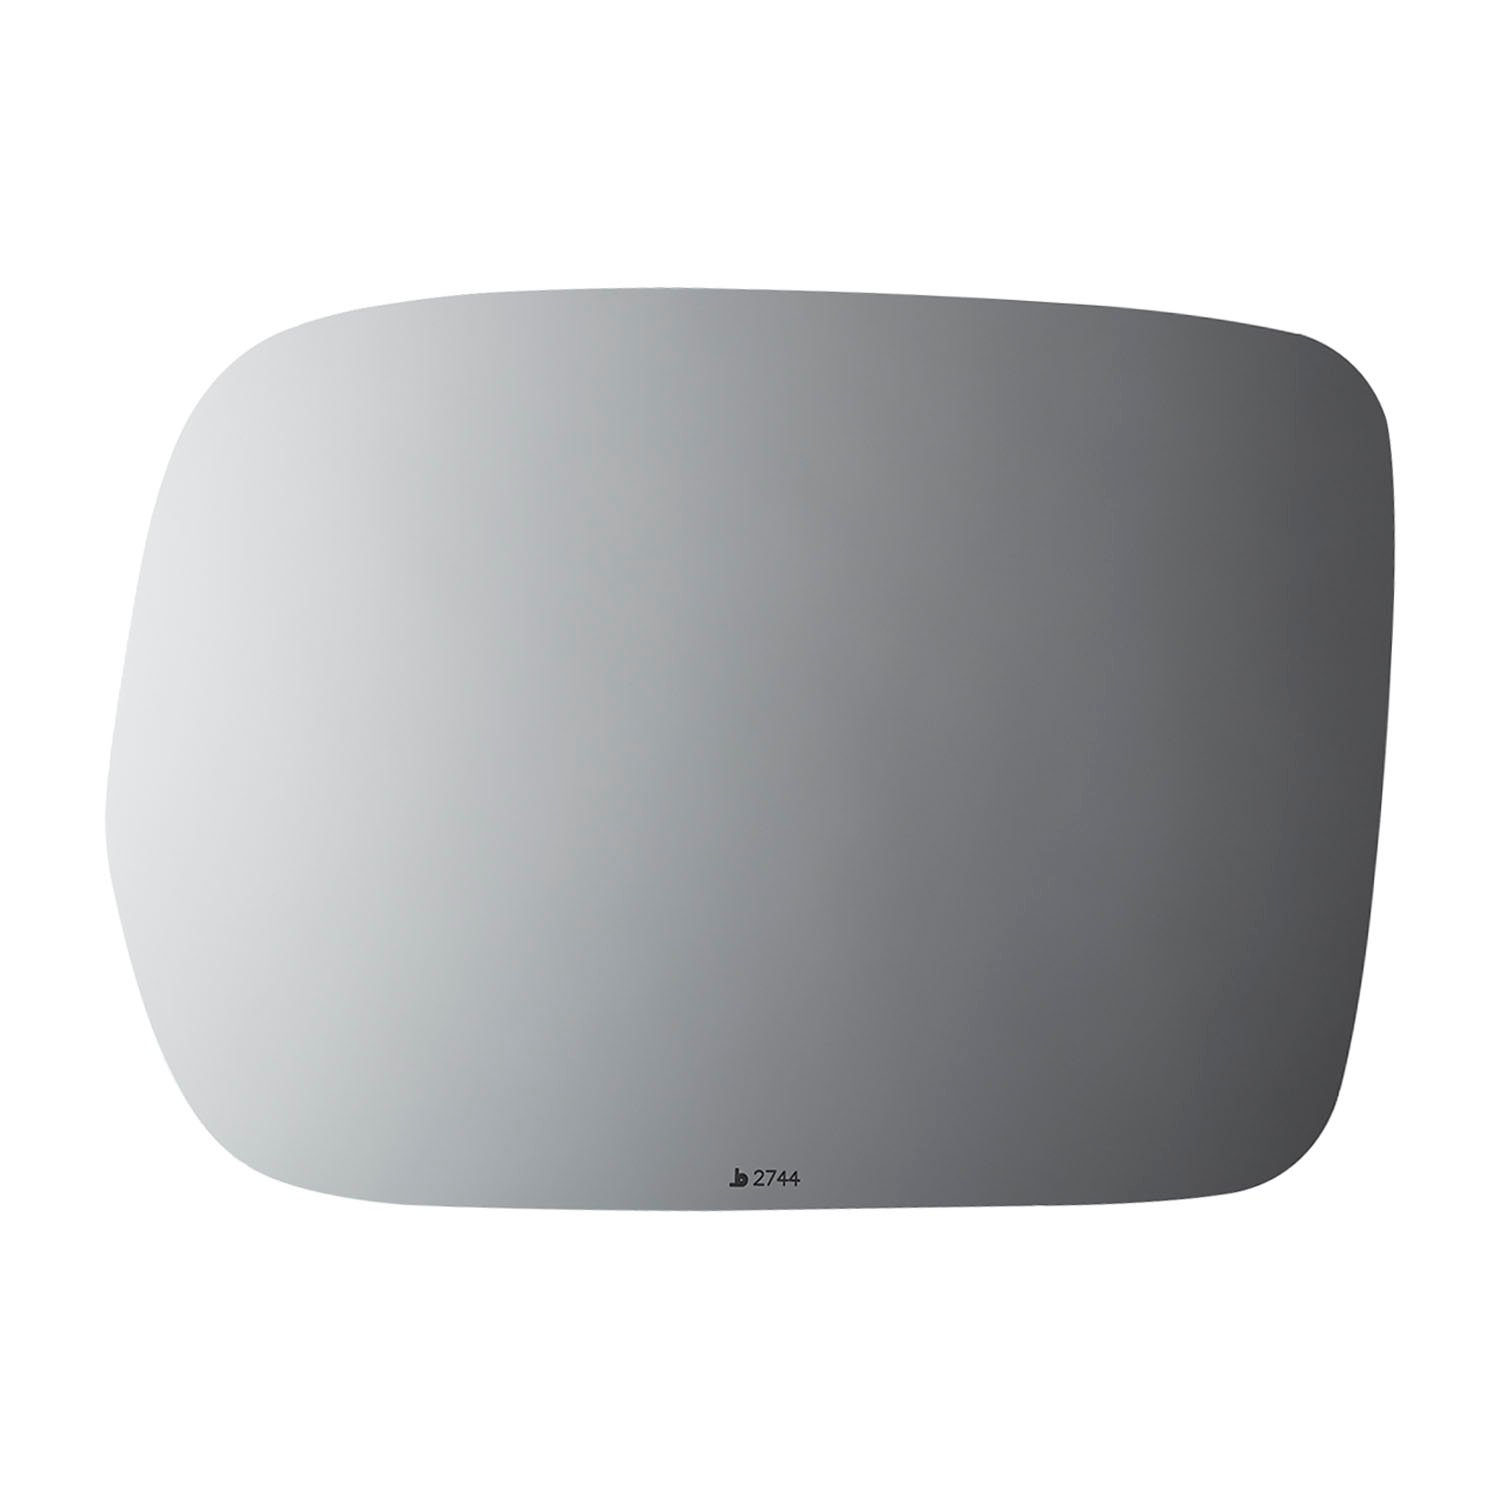 2744 SIDE VIEW MIRROR